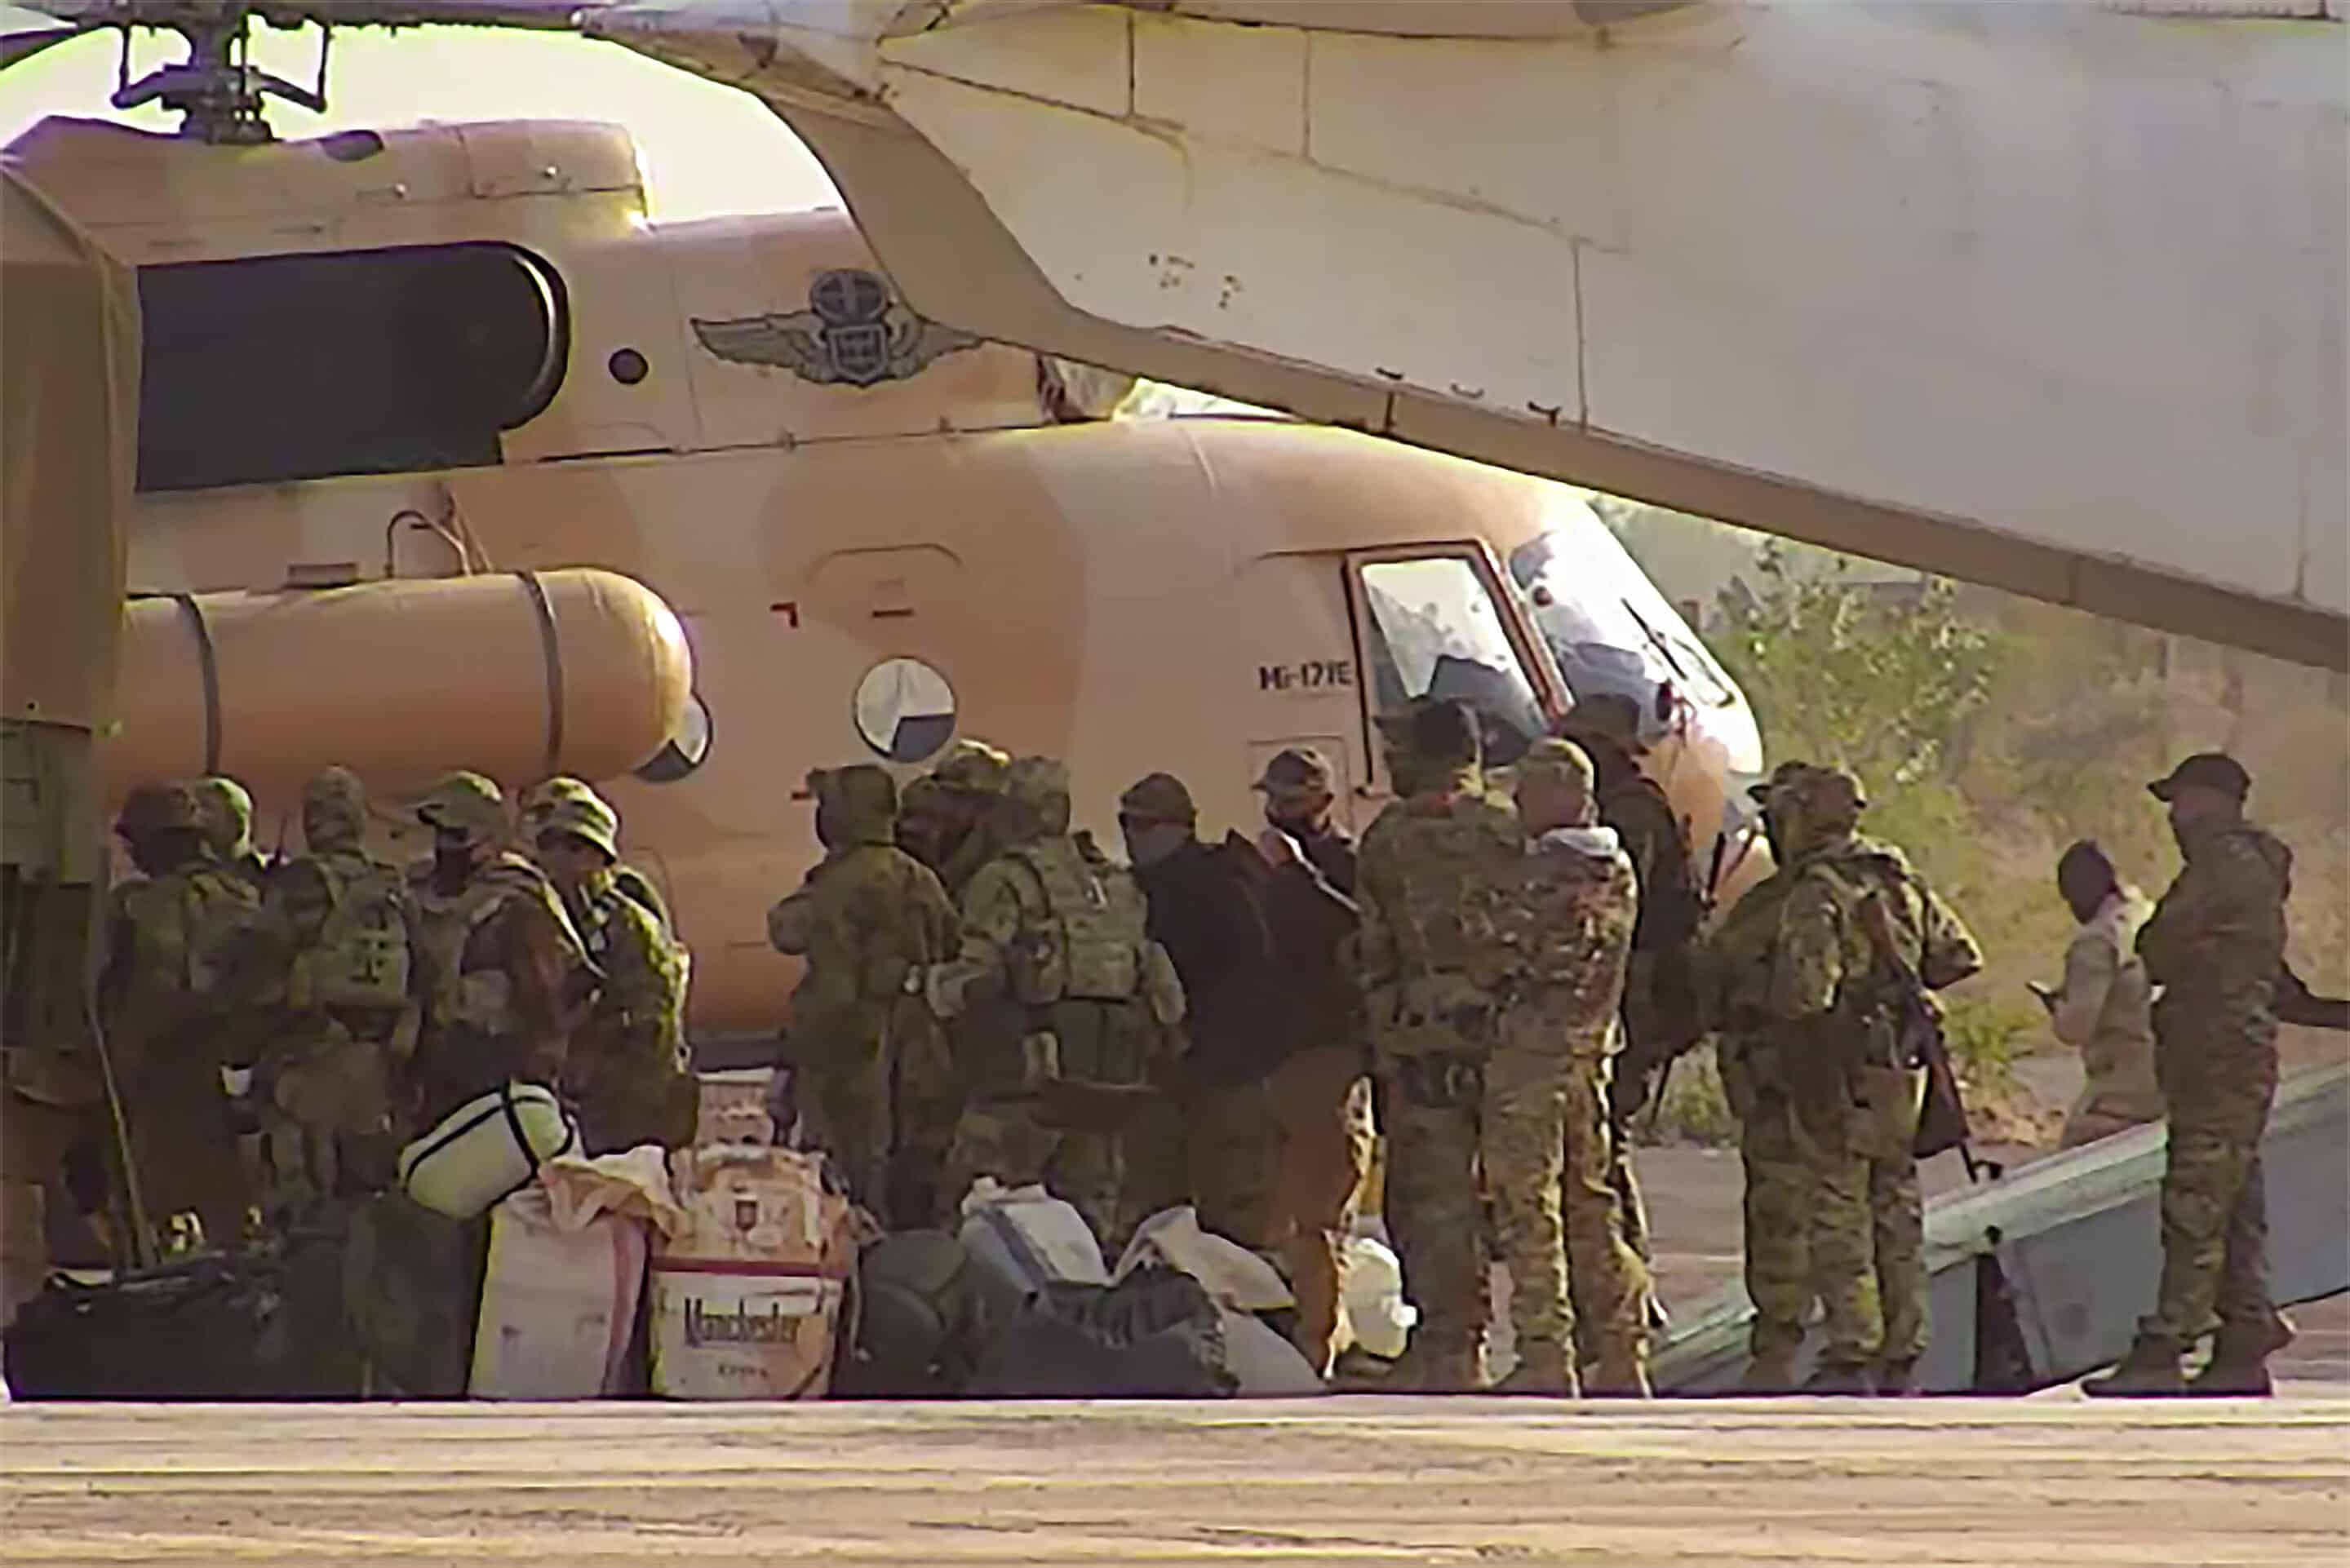 This undated photograph handed out by French military shows Russian mercenaries boarding a helicopter in northern Mali. Russia has engaged in under-the-radar military operations in at least half a dozen countries in Africa in the last five years using a shadowy mercenary force analysts say is loyal to President Vladimir Putin. The analysts say the Wagner Group of mercenaries is also key to Putin's ambitions to re-impose Russian influence on a global scale. (French Army via AP)/MAL503/22112753752198/AP PROVIDES ACCESS TO THIS PUBLICLY DISTRIBUTED HANDOUT PHOTO PROVIDED BY FRENCH MILITARY MANDATORY CREDIT./2204231340